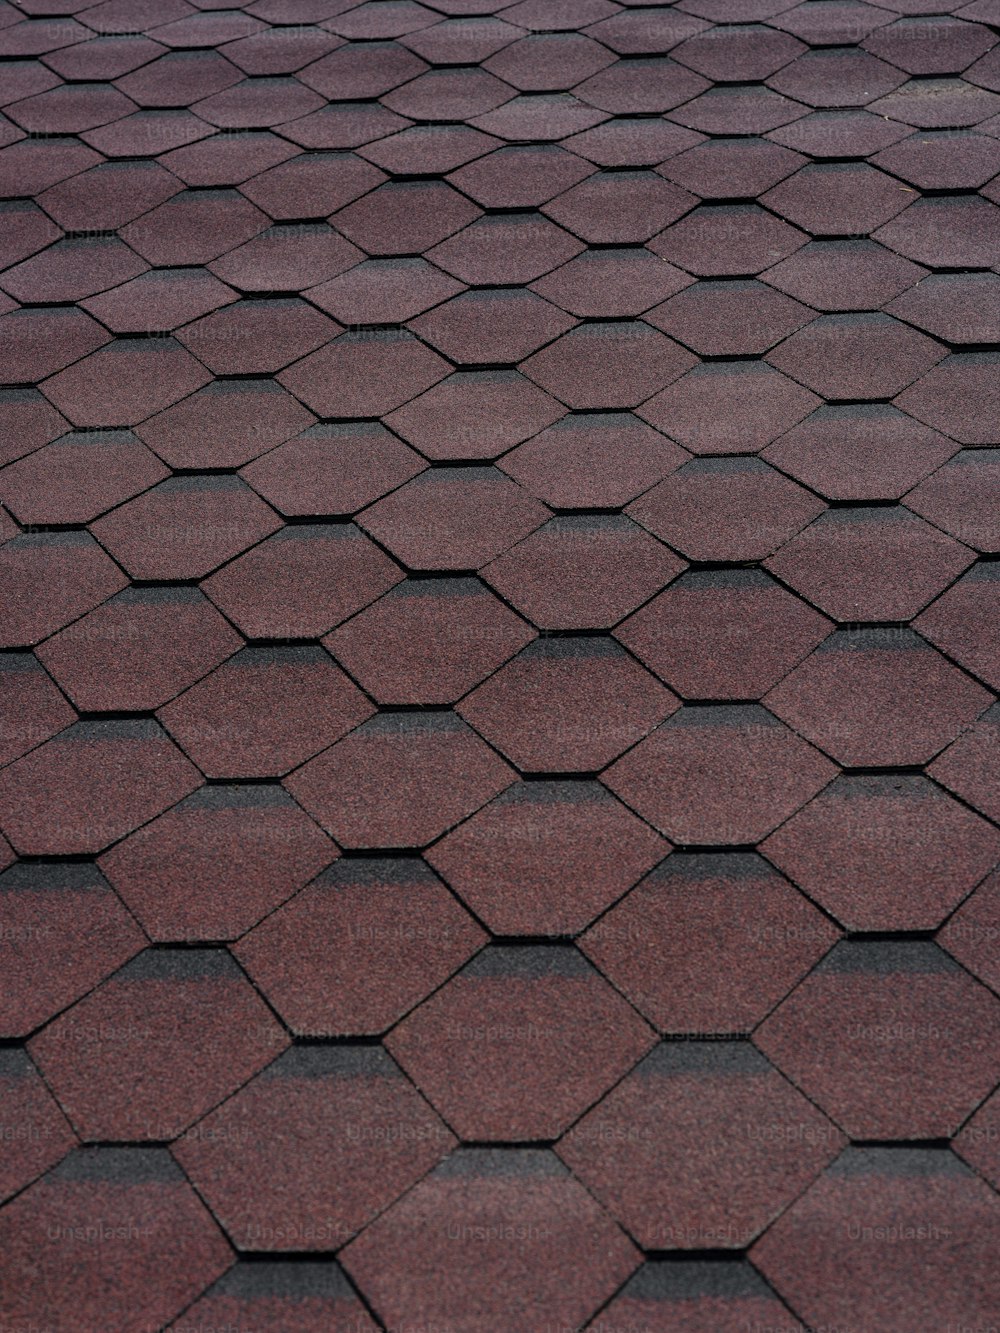 a close up of a red tiled roof